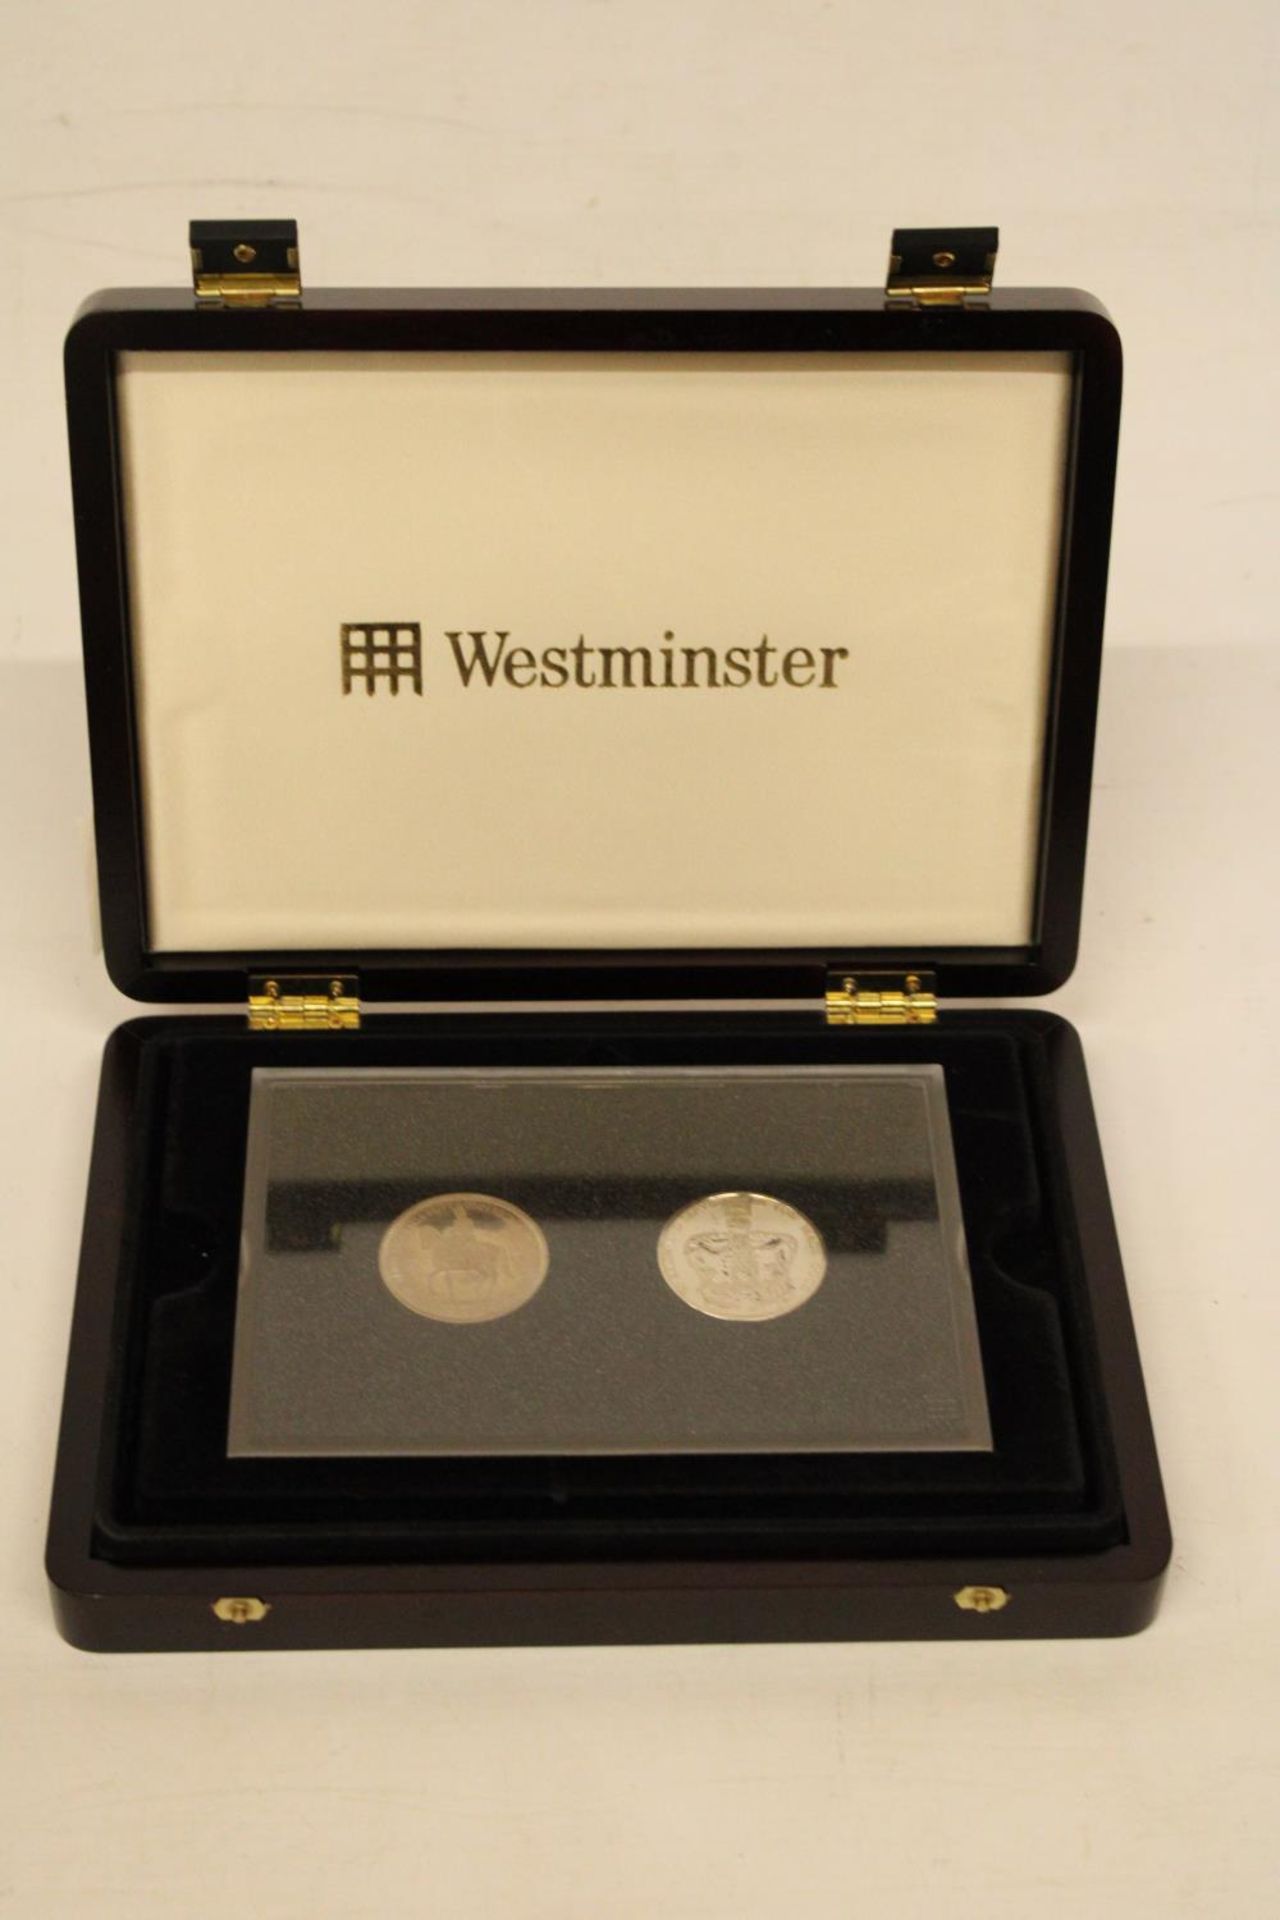 A WESTMINSTER COLLECTION OF COINS TO INCLUDE A QUEEN ELIZABETH II CORONATION CROWN FIVE SHILLINGS